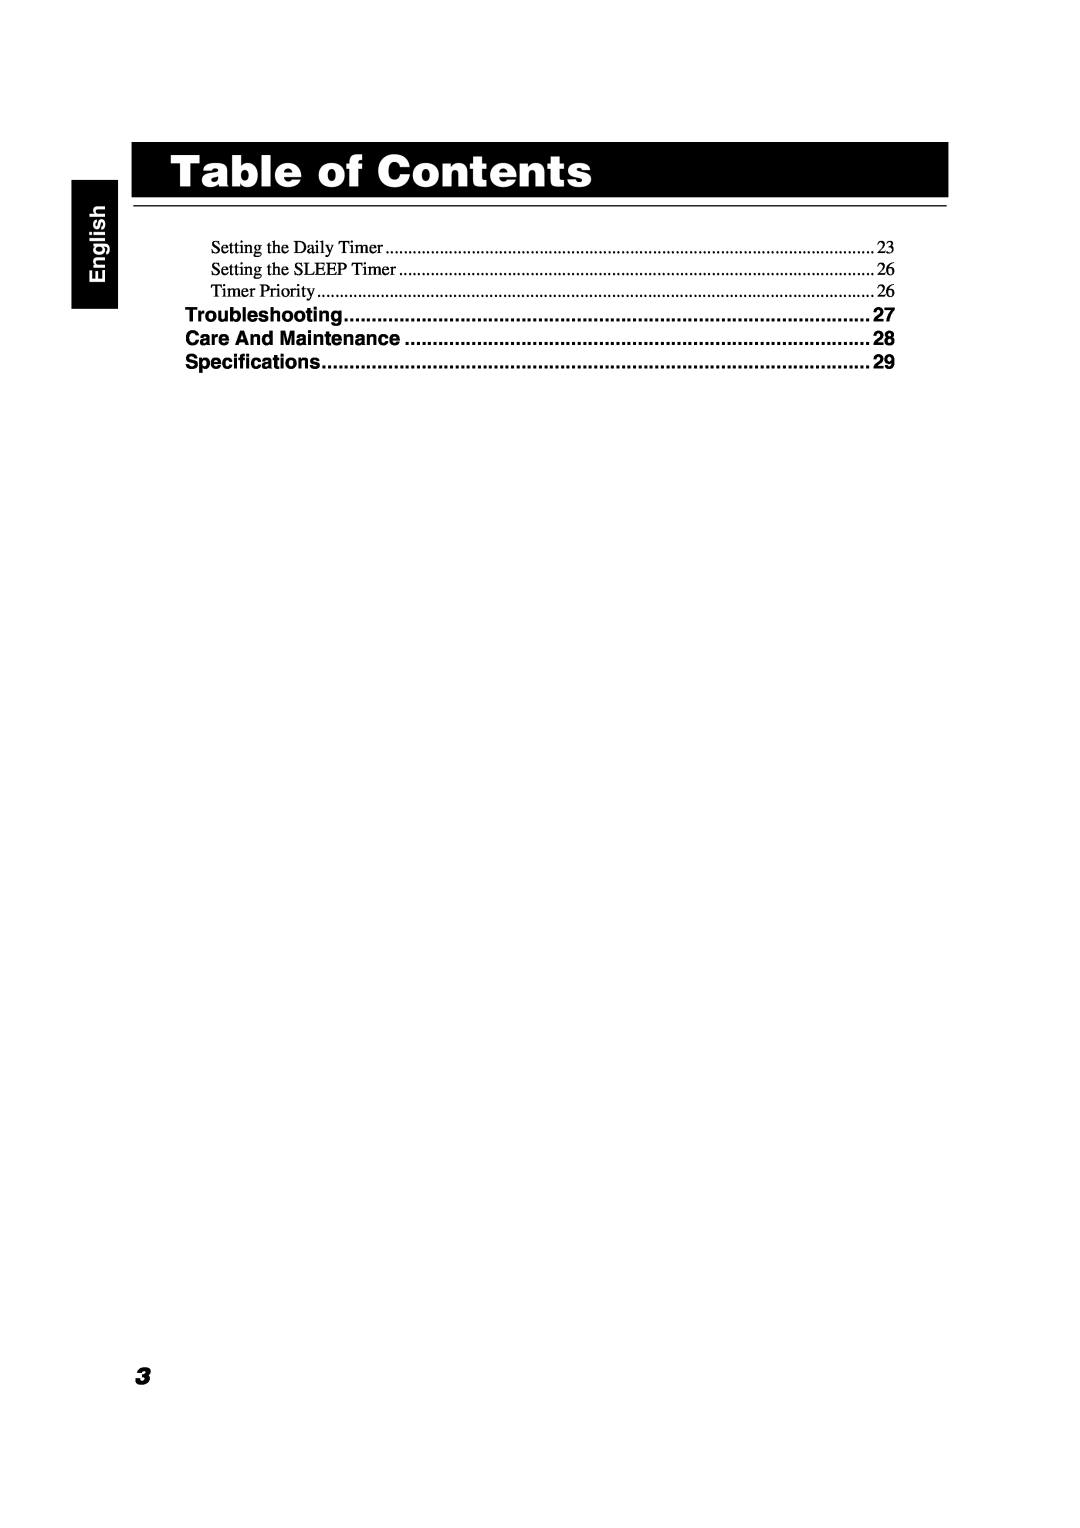 JVC FS-X1, FS-X3 manual Table of Contents, English 